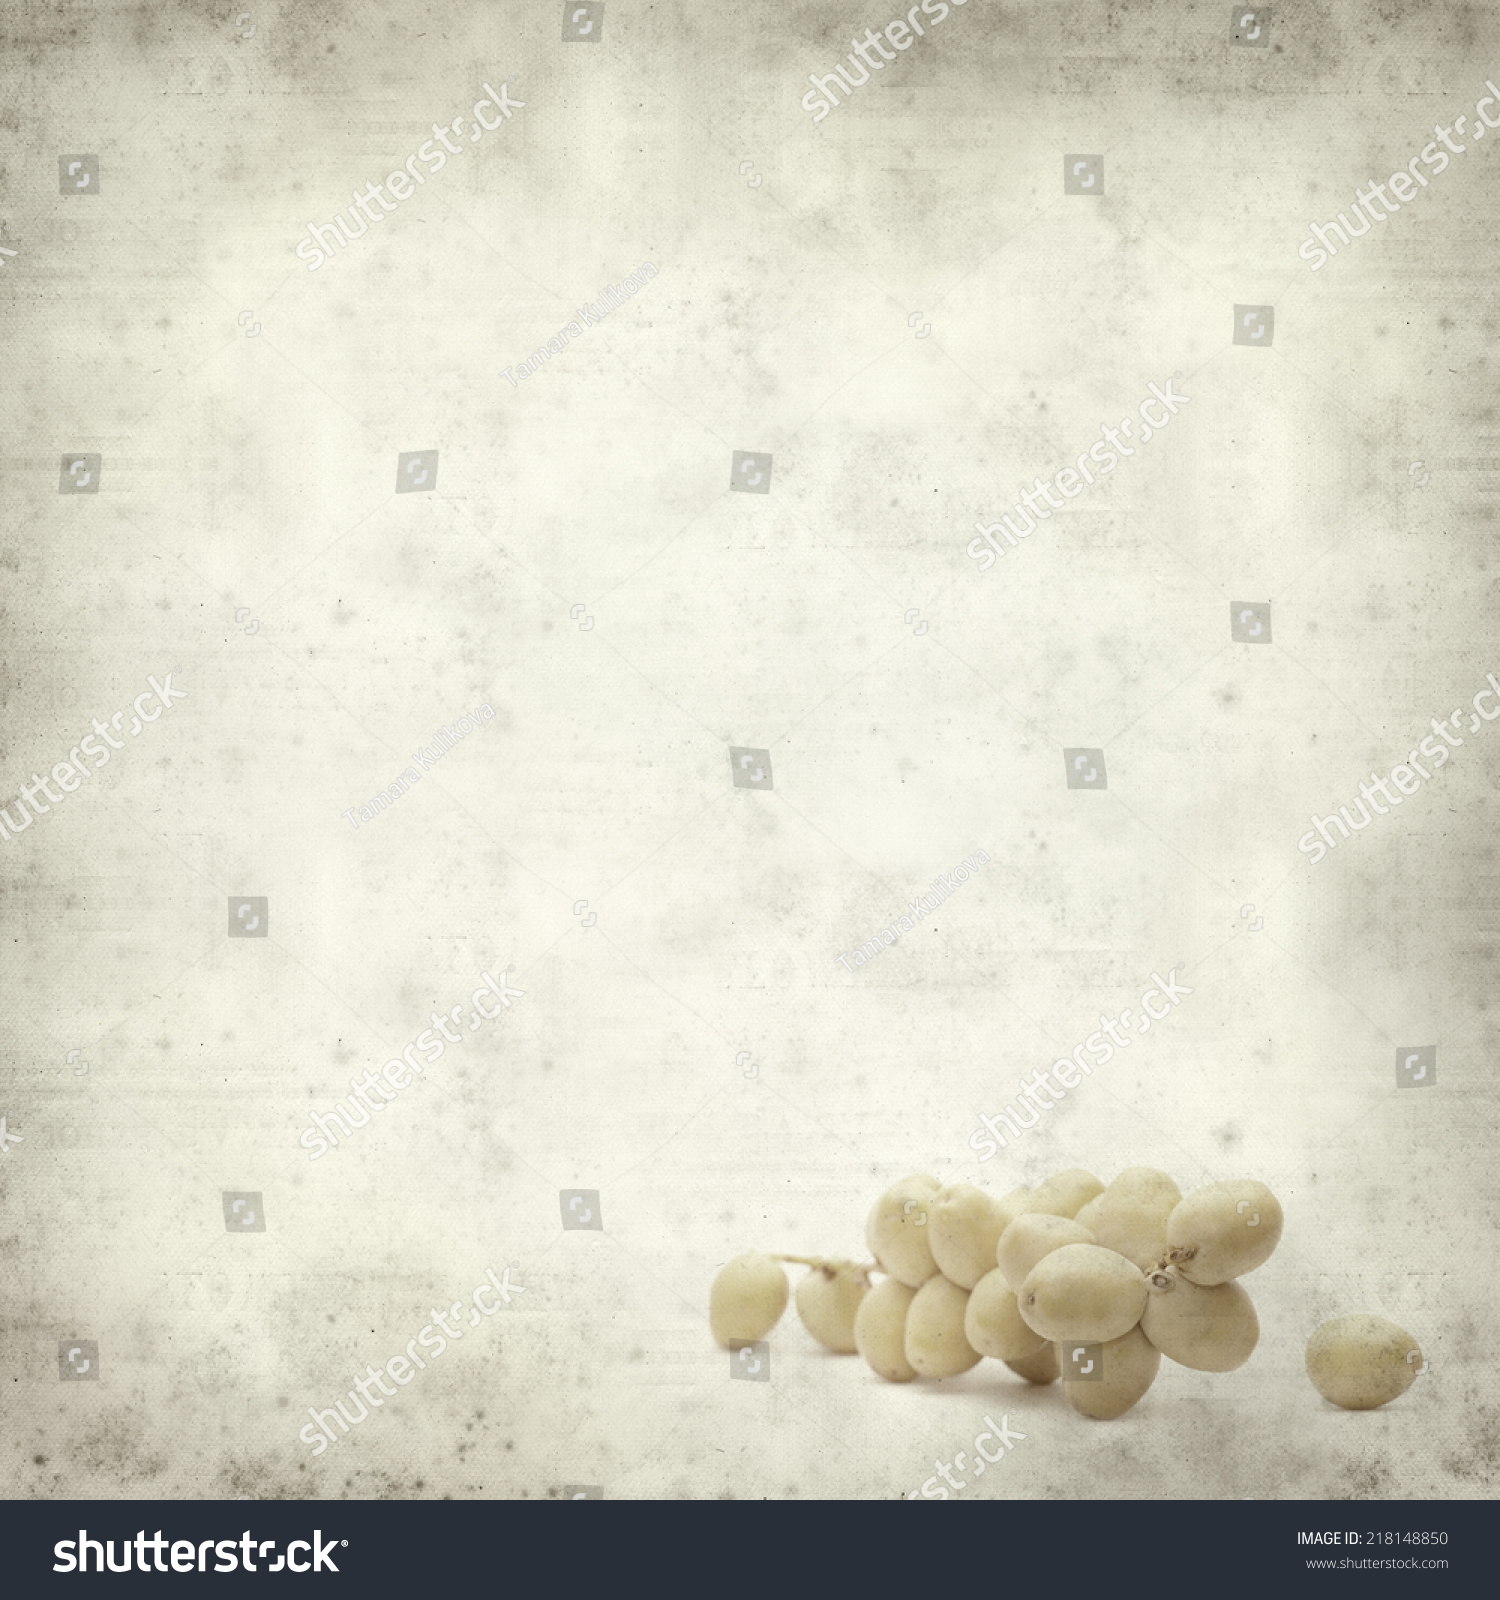 textured old paper background with fresh date palm fruit #218148850